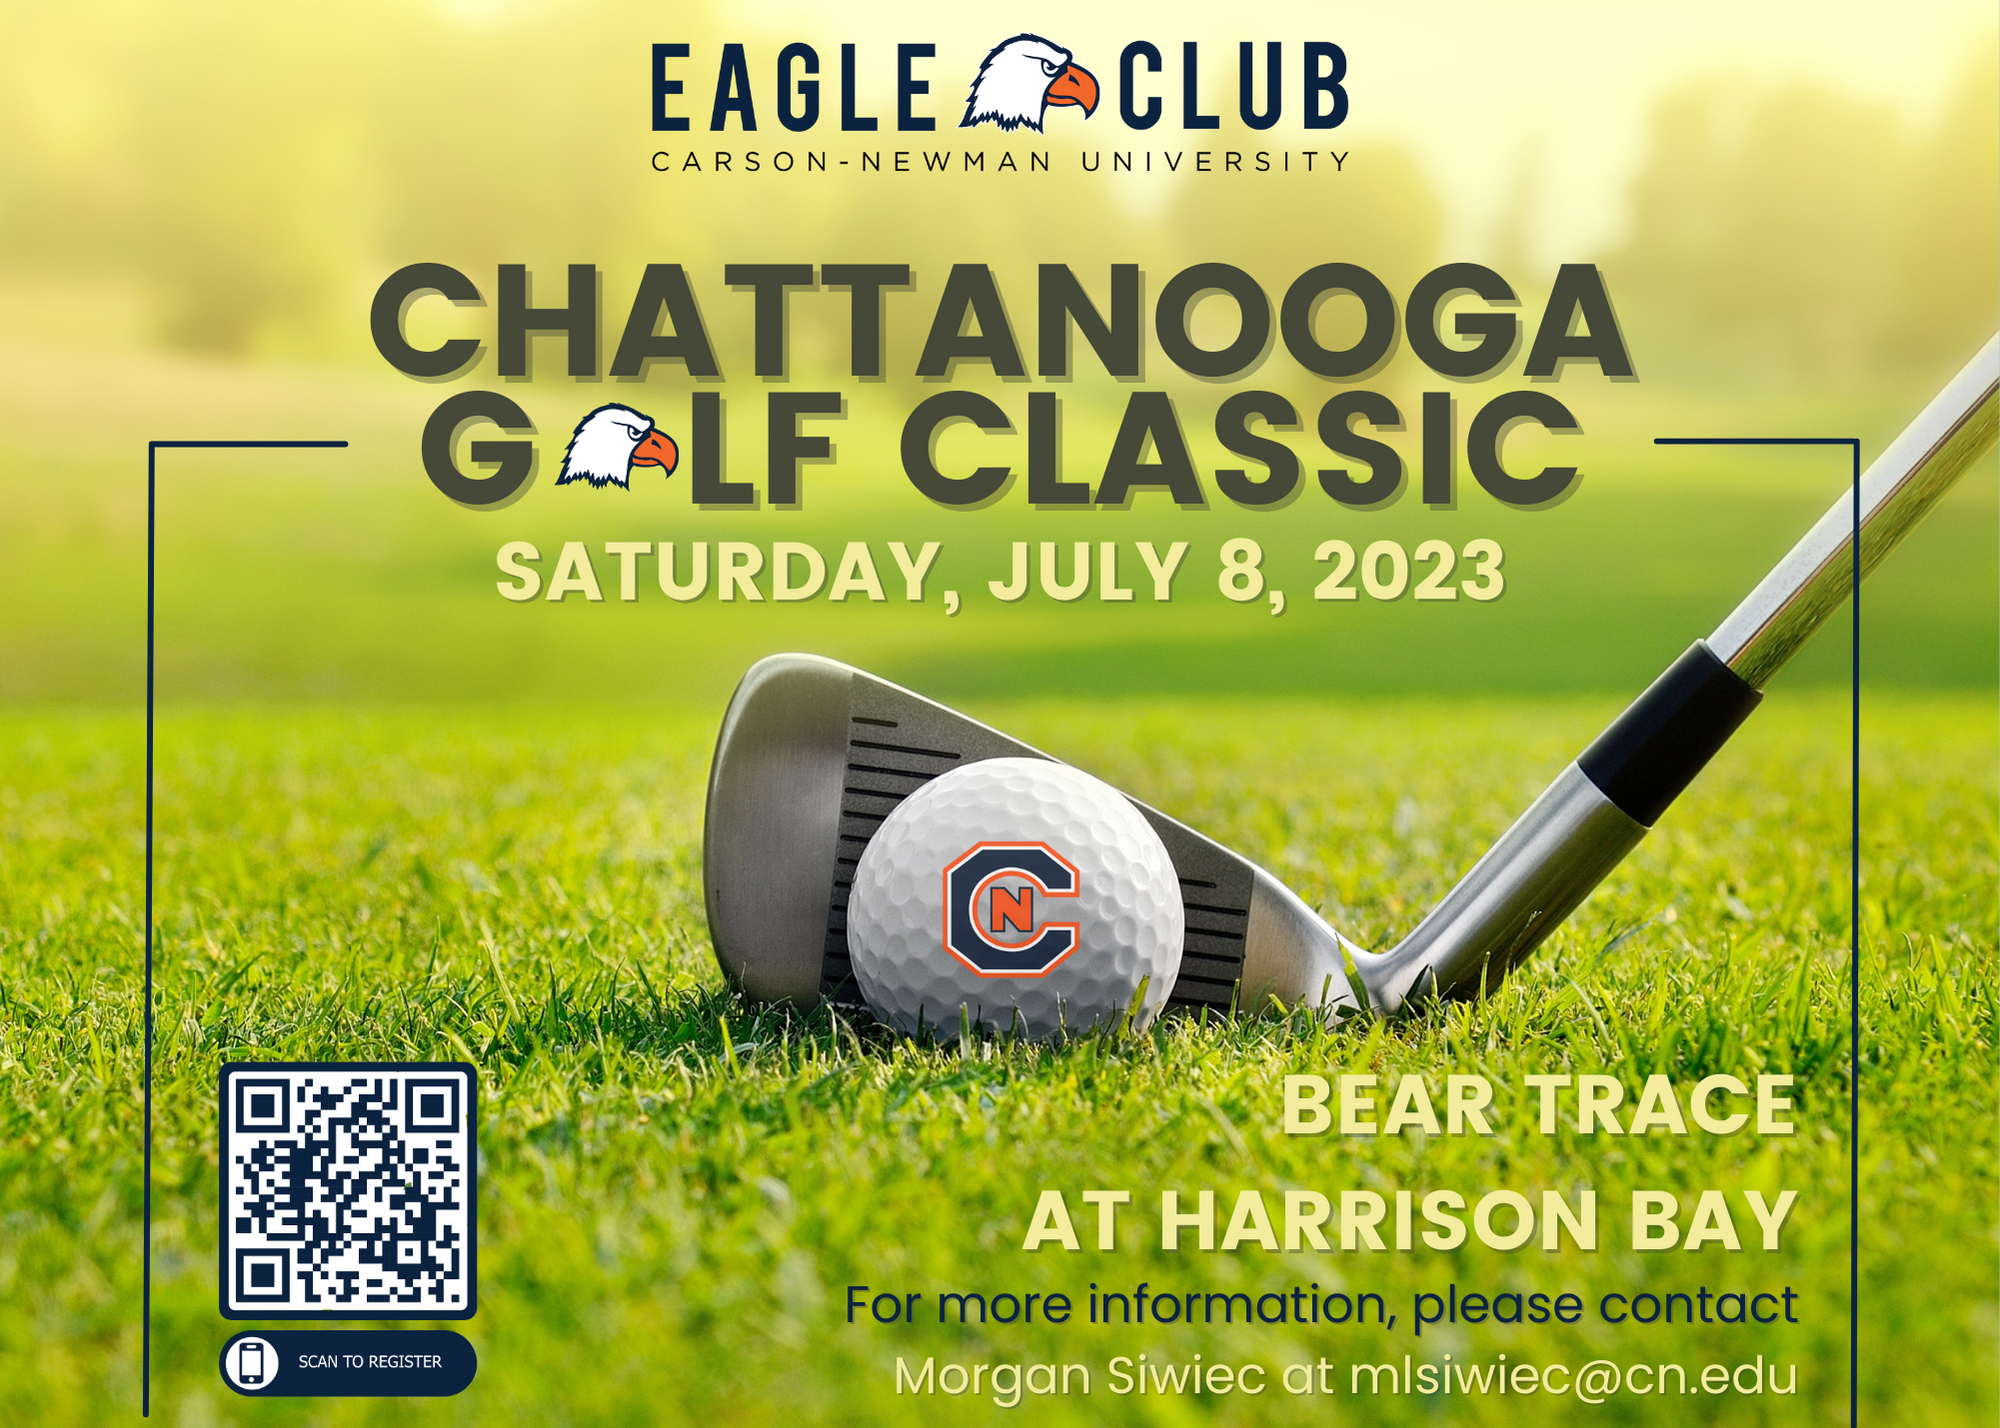 FInal Eagle Club Summer Golf Tour event set for Chattanooga in early July